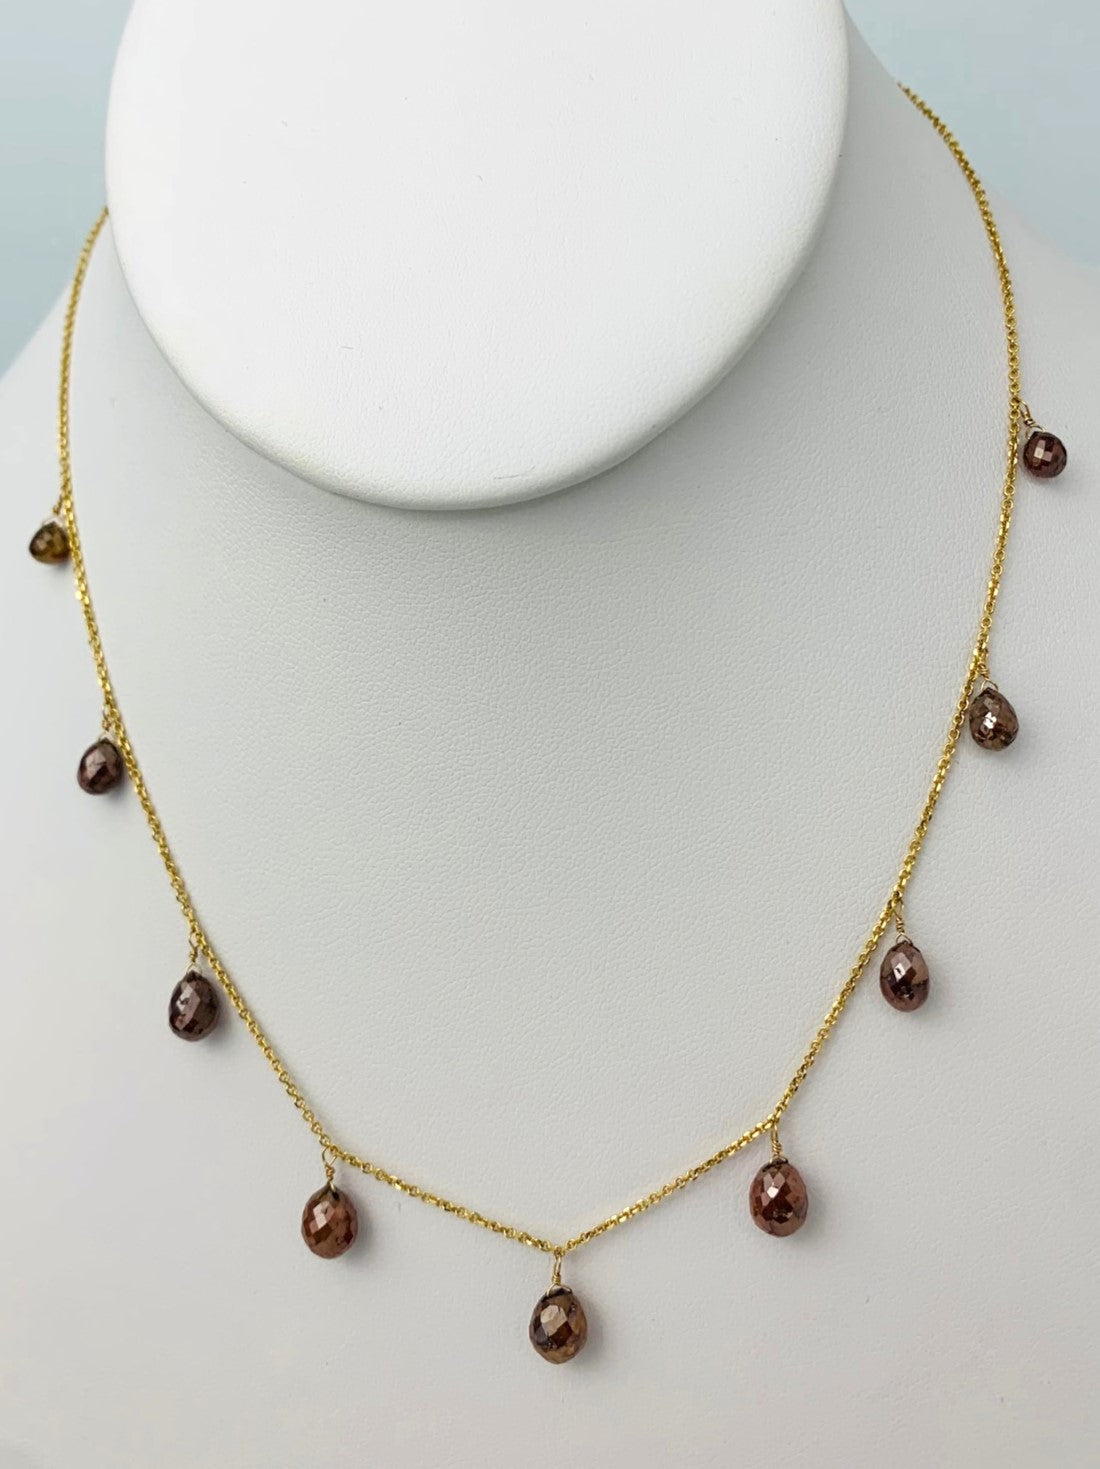 16" Rustic Red Diamond Briolette Dangle Necklace in 18KY - NCK-301-DNGDIA18Y-RED-16 7.5ctw